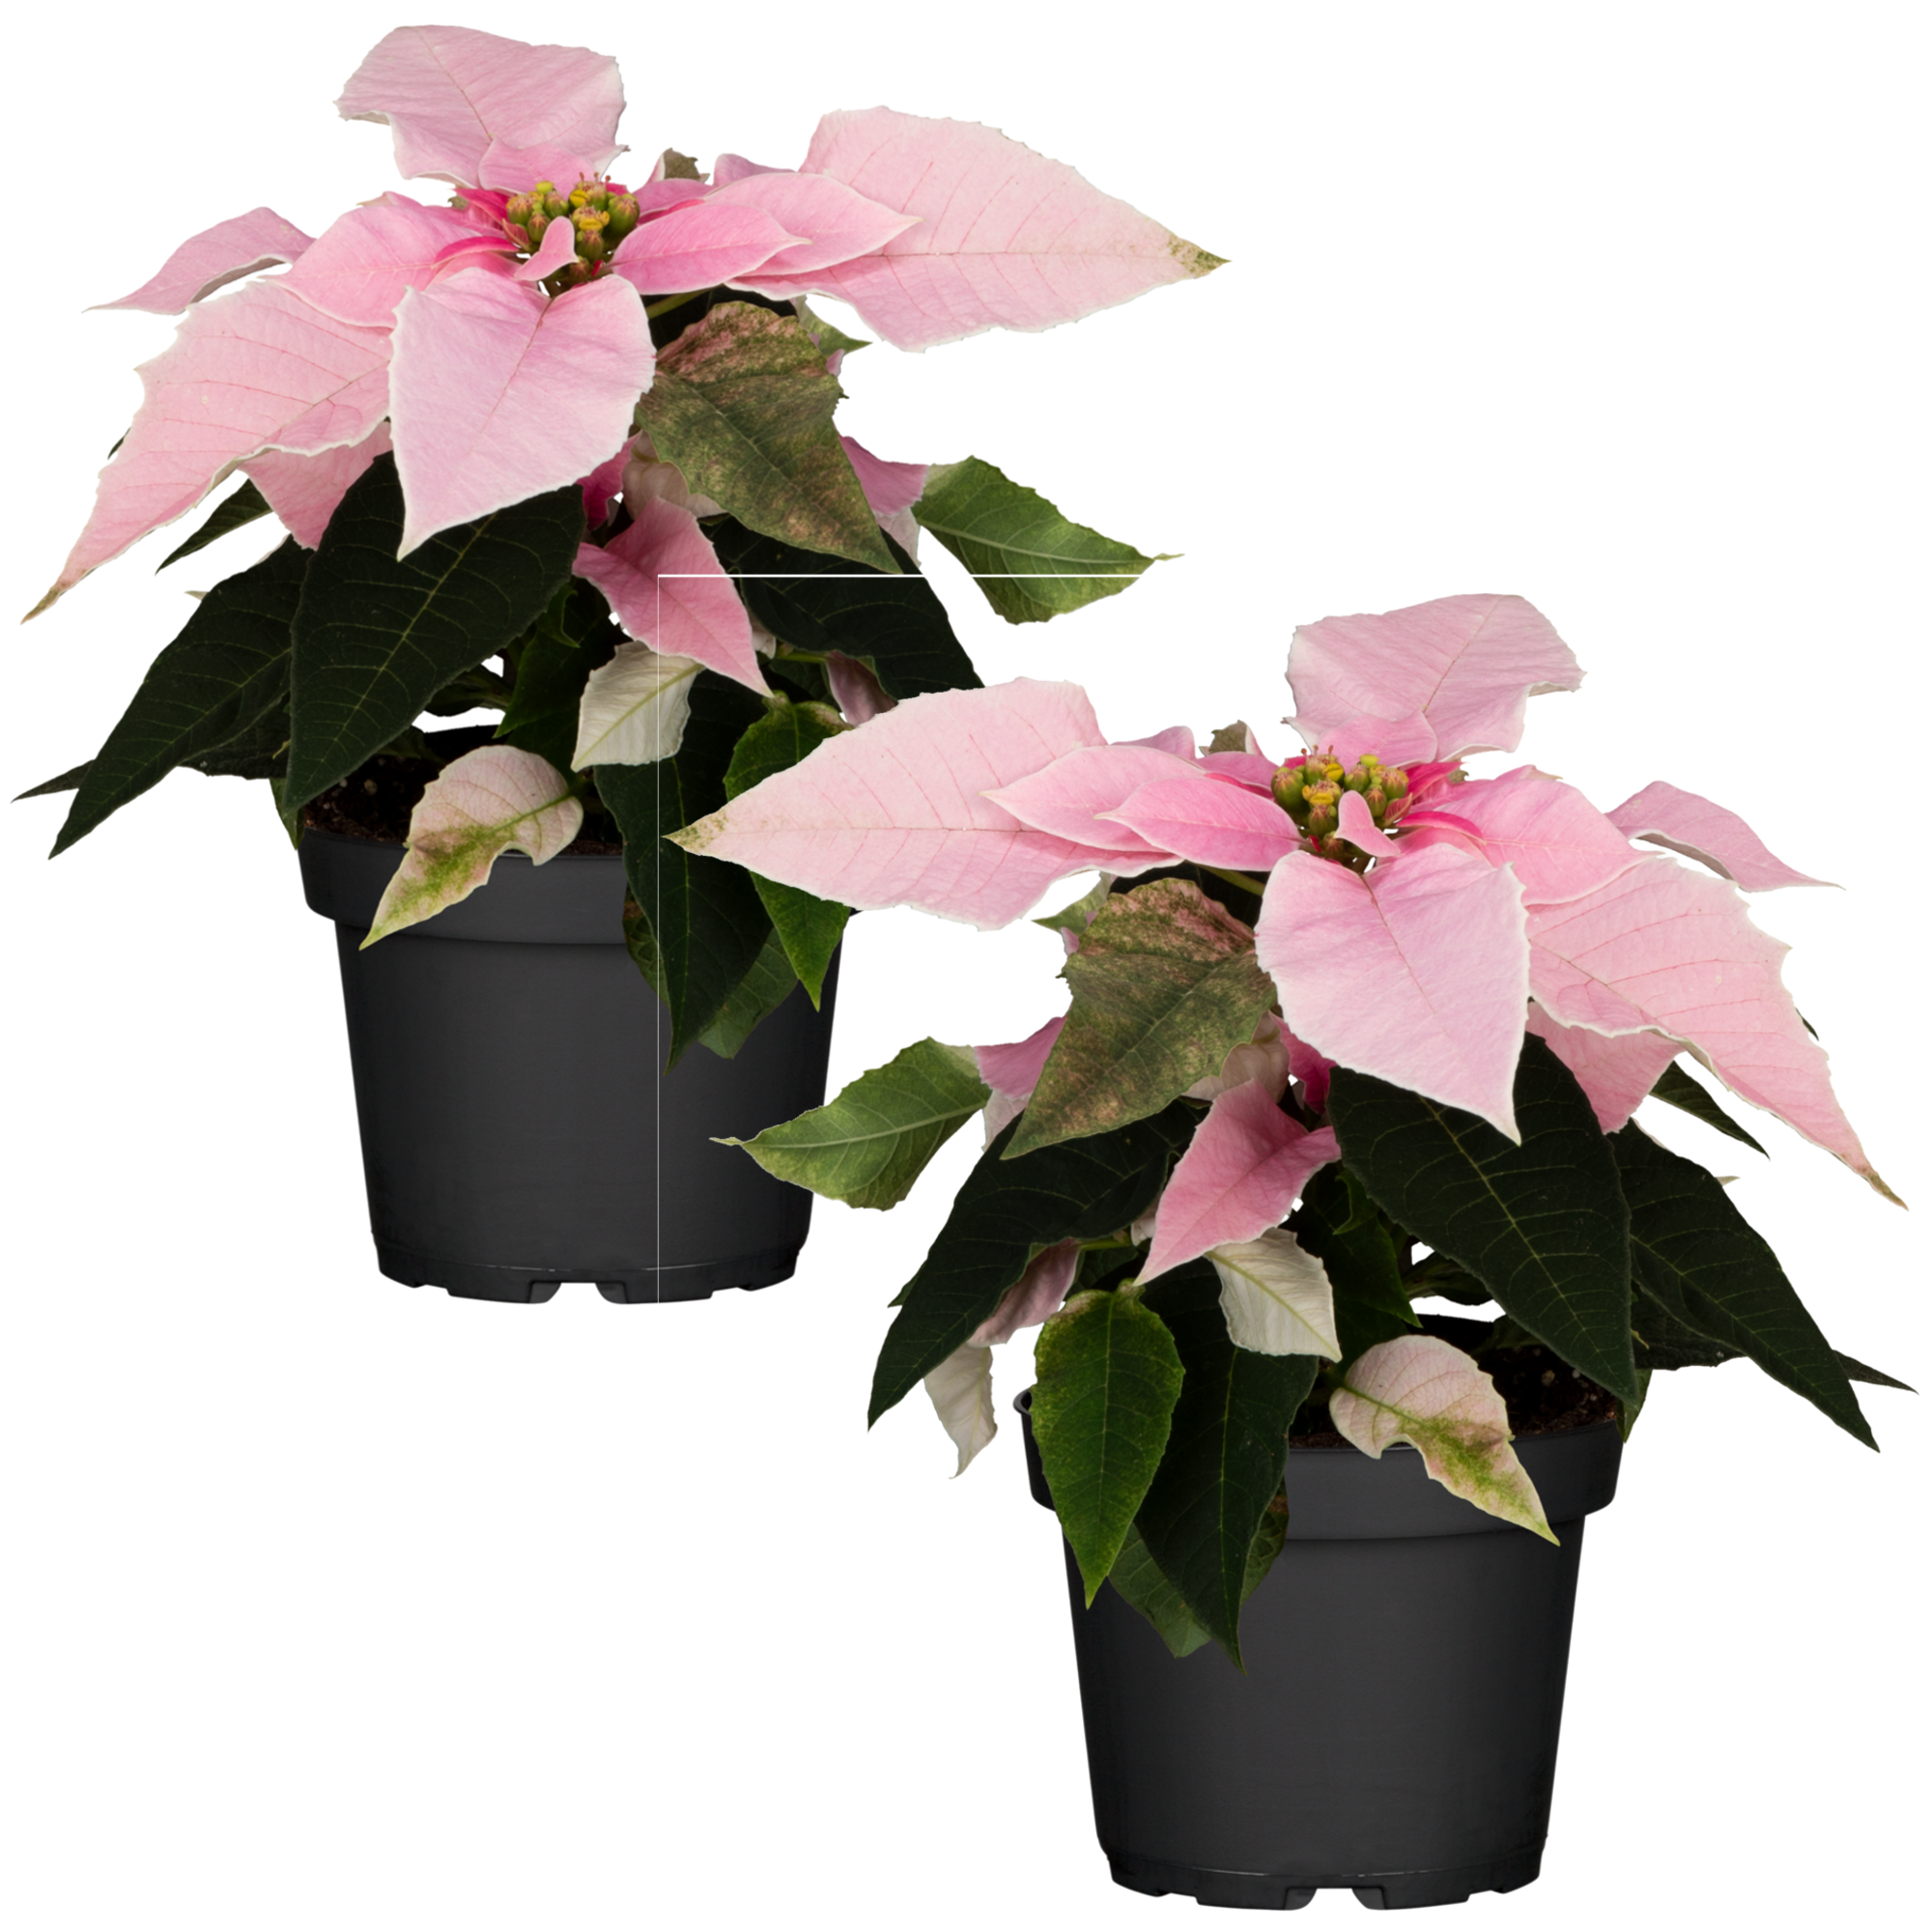 Fairtrade Weihnachtsstern rosa 10,5 cm Topf, 2er-Set + product picture